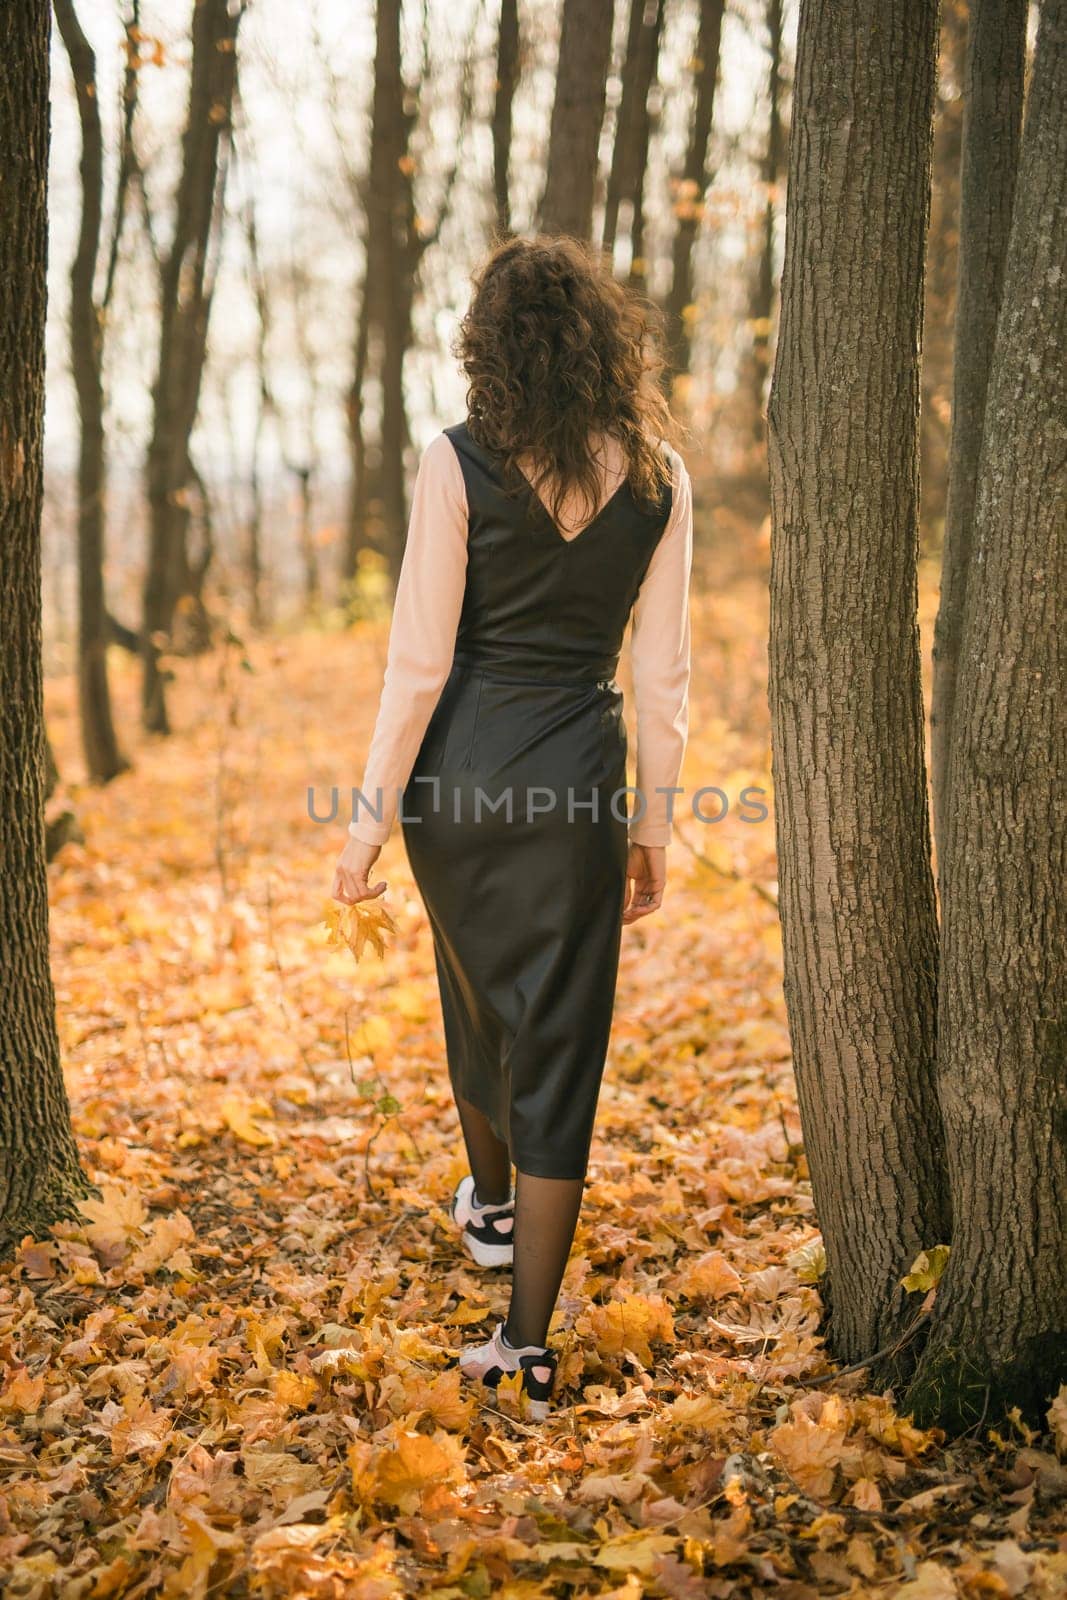 Back view of a girl walking on autumn park in fall season. Millennial generation and youth.